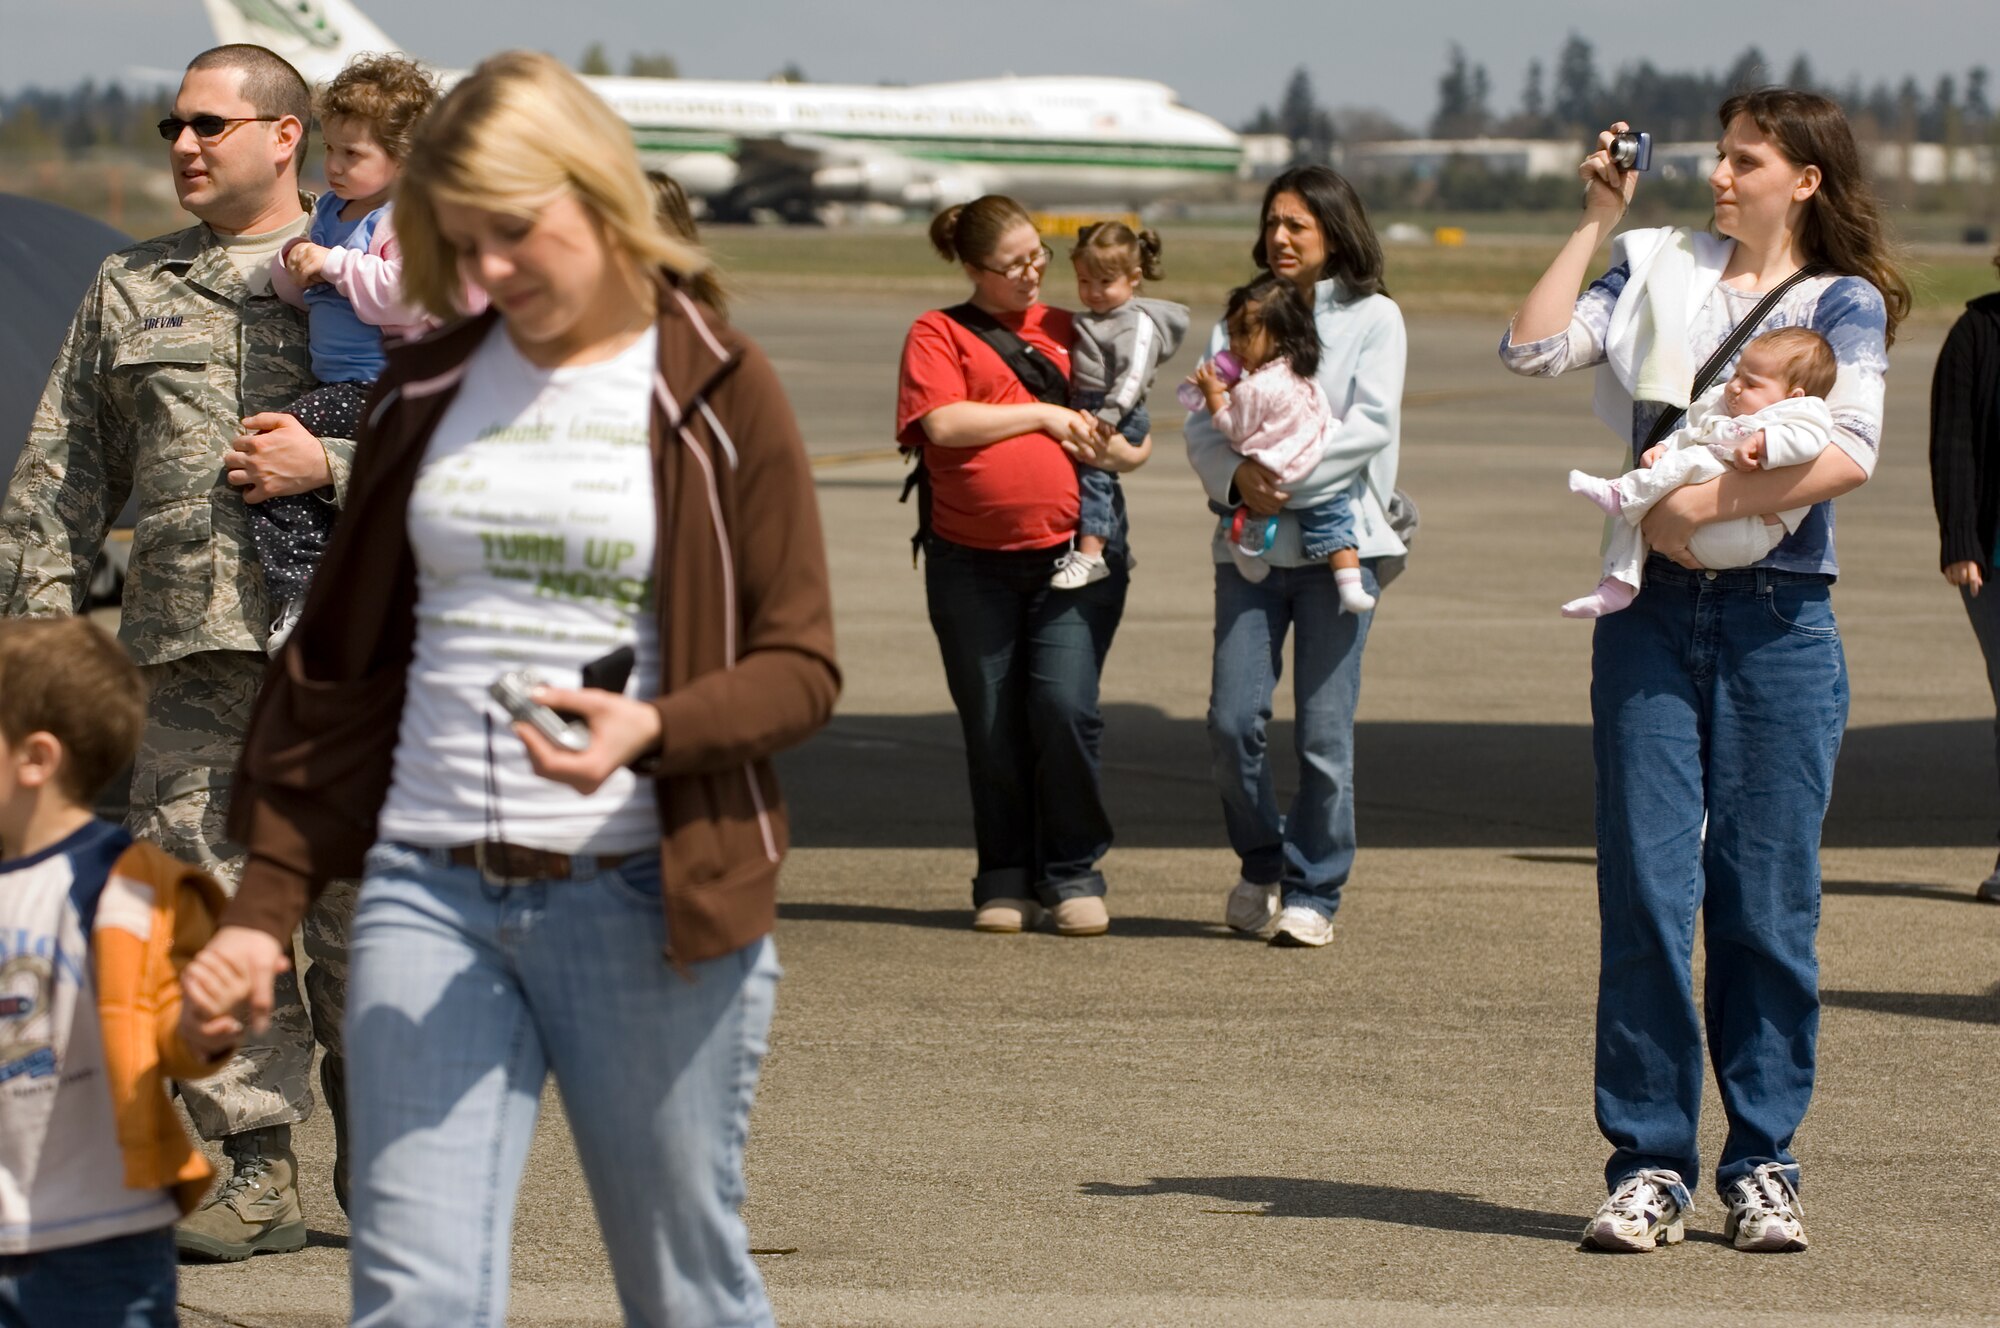 A group of McChord families head for a waiting bus following their tour of the aircraft.